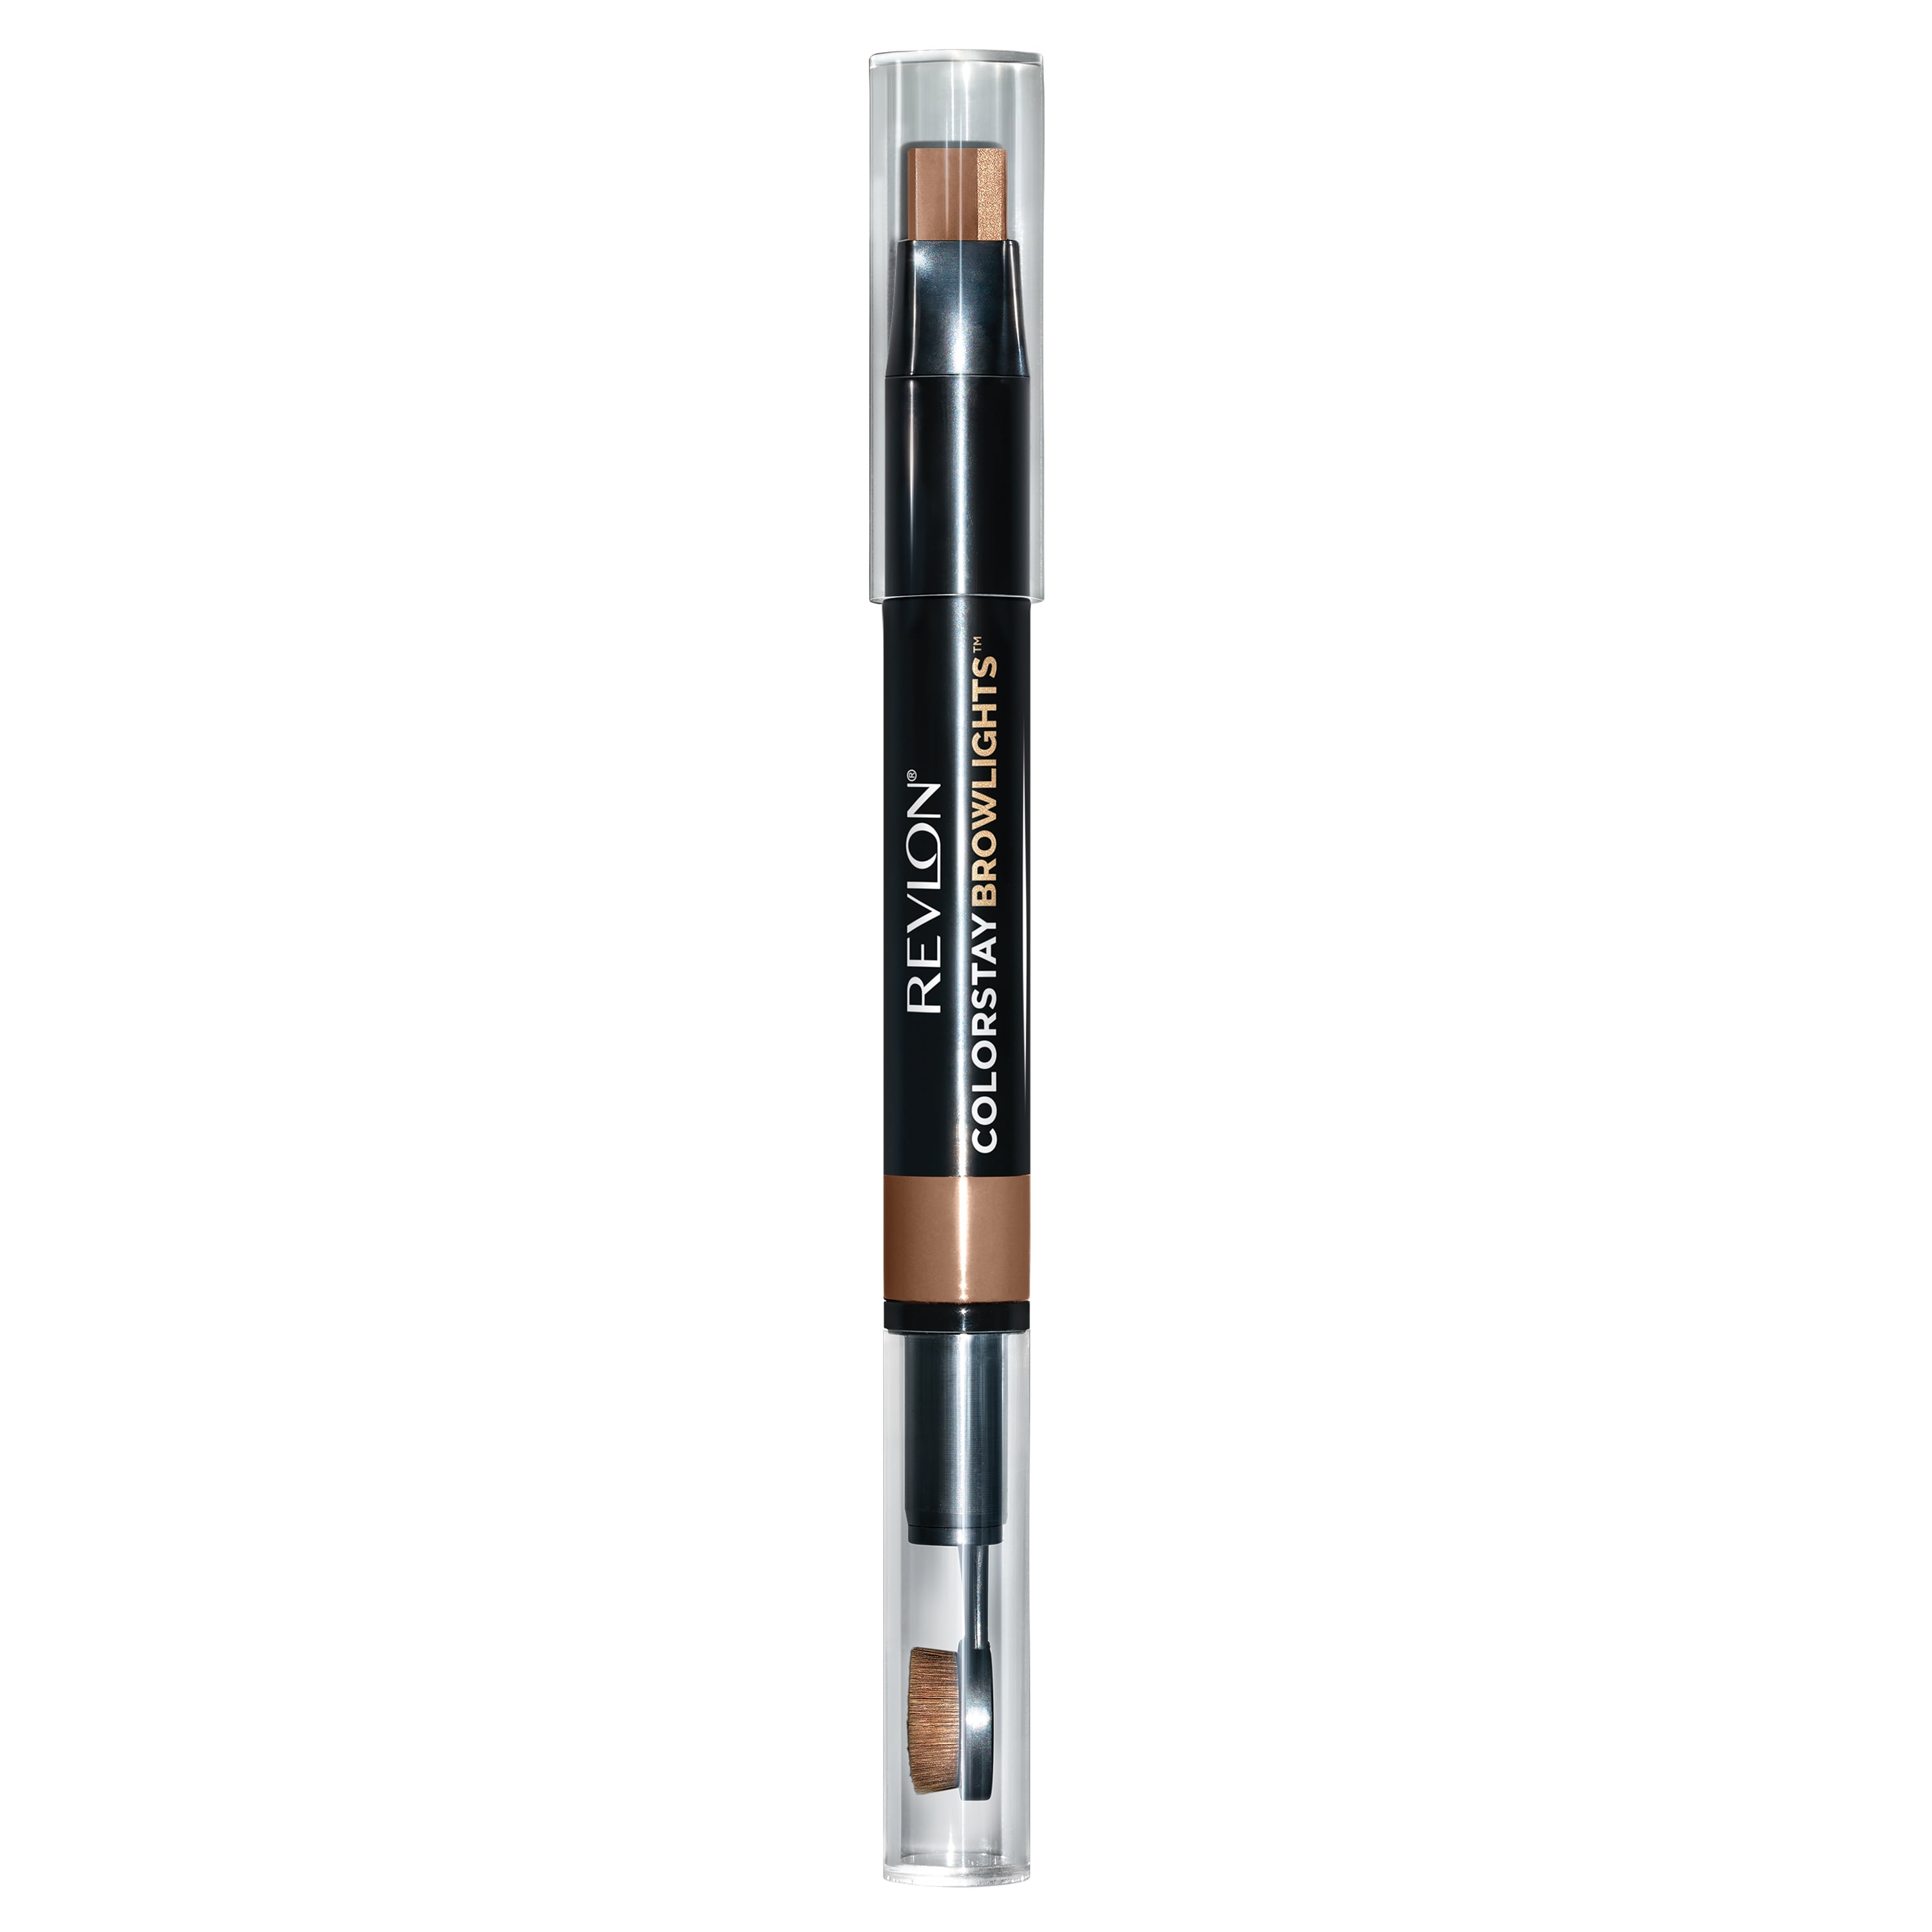 Revlon Colorstay Browlights Pencil, Eyebrow Pencil and Brow Highlighter, Soft Brown